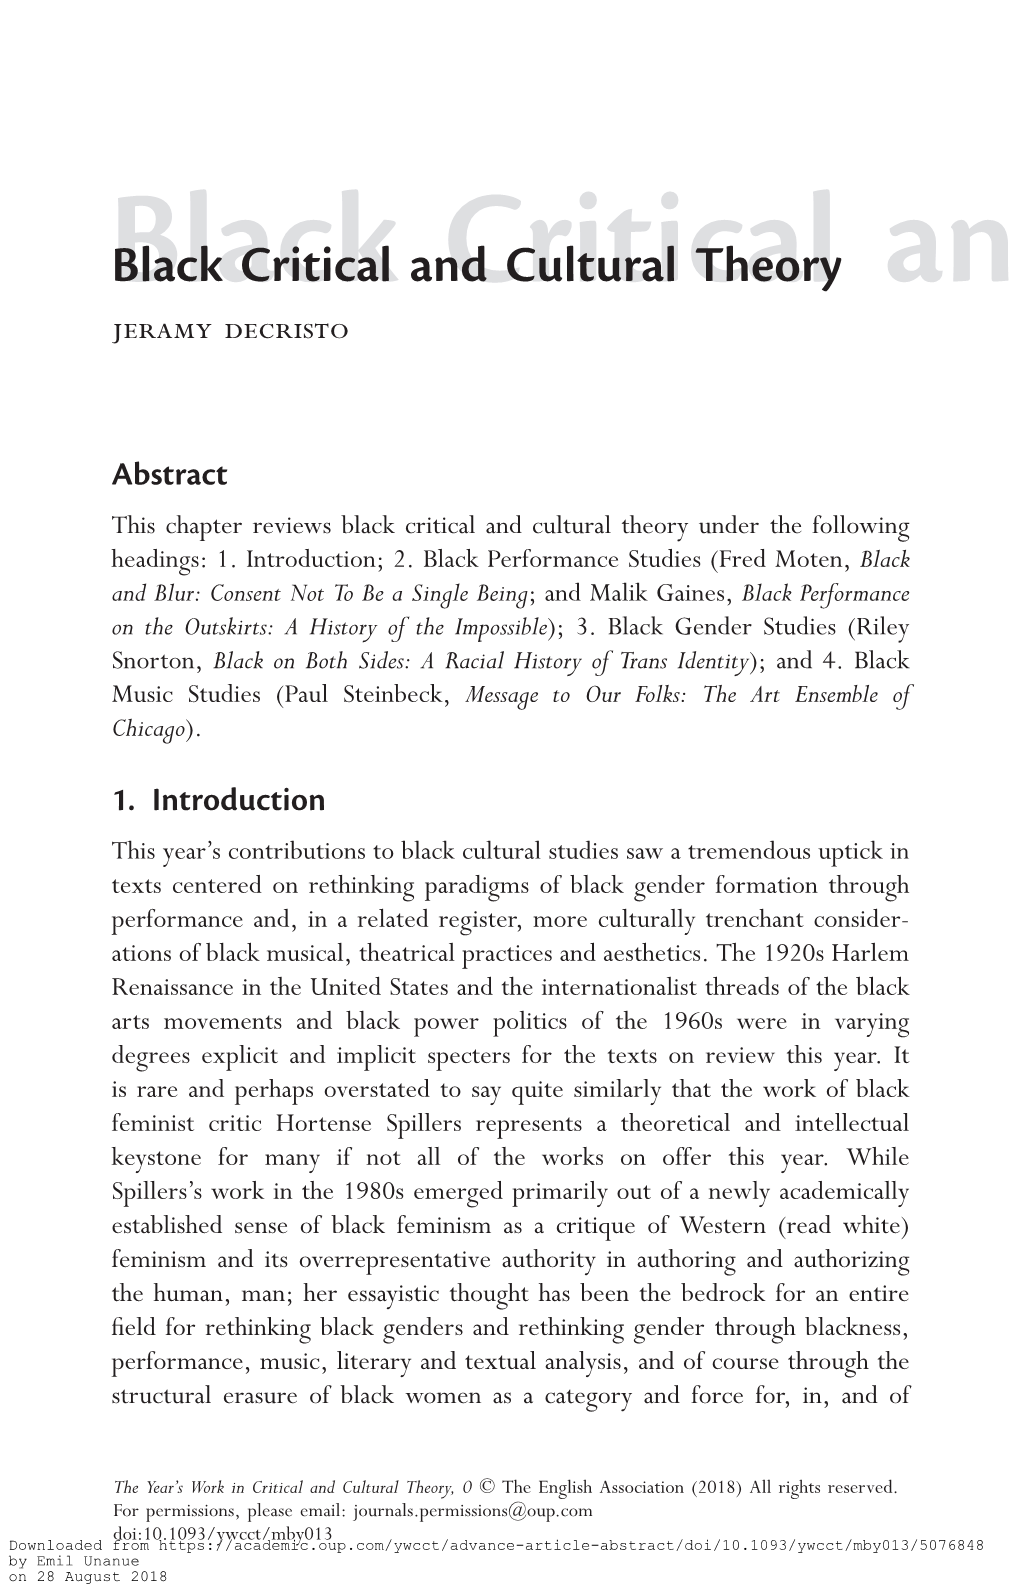 Black Critical and Critical Cultural Theory and Jeramy Decristo